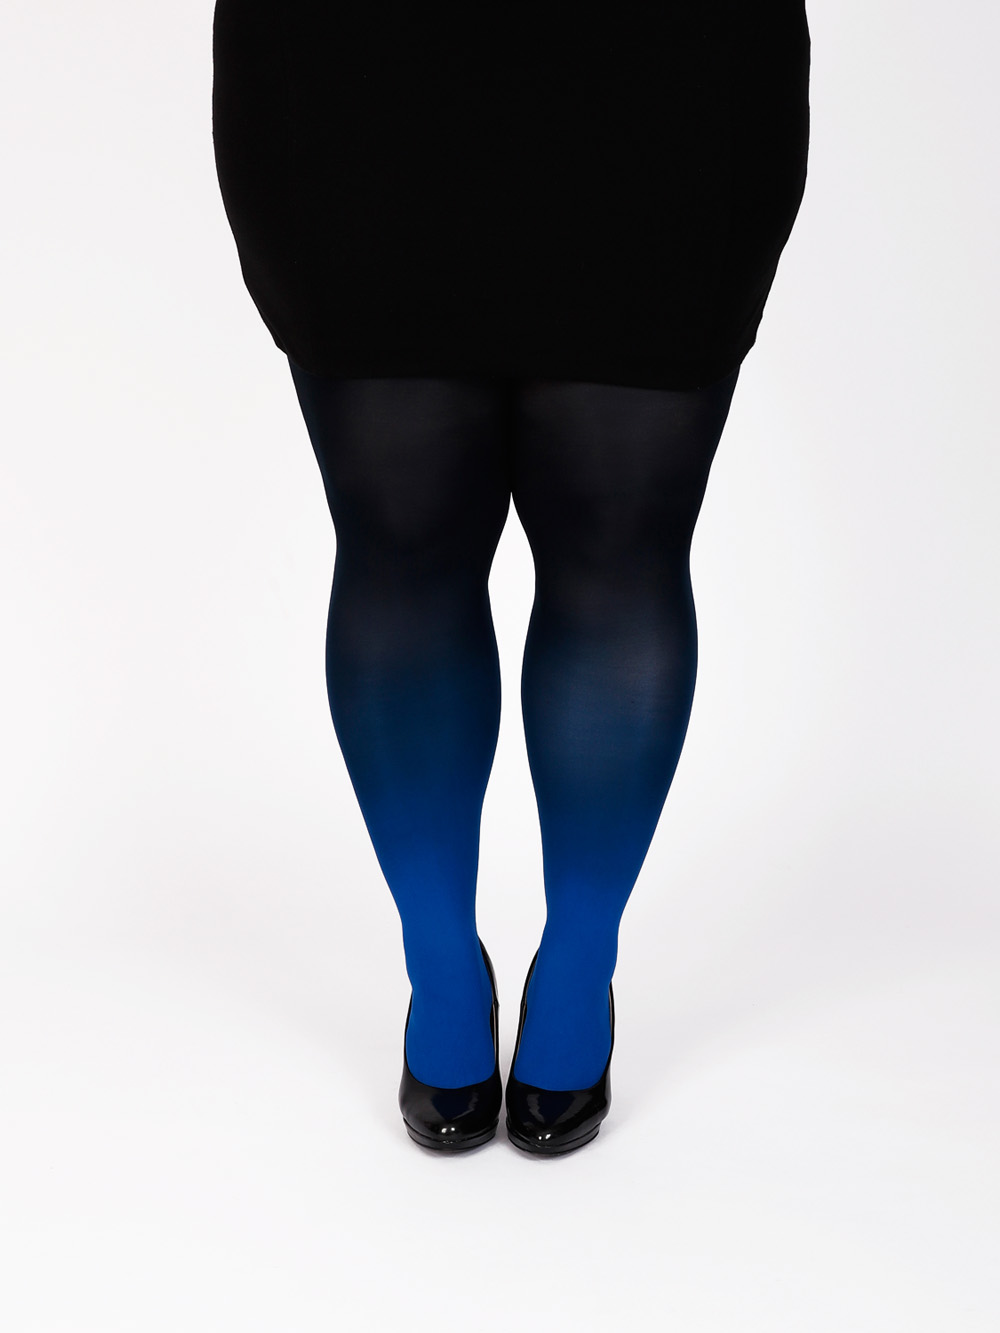 Blue OMBRE Tights Gradient White to Navy Stockings 